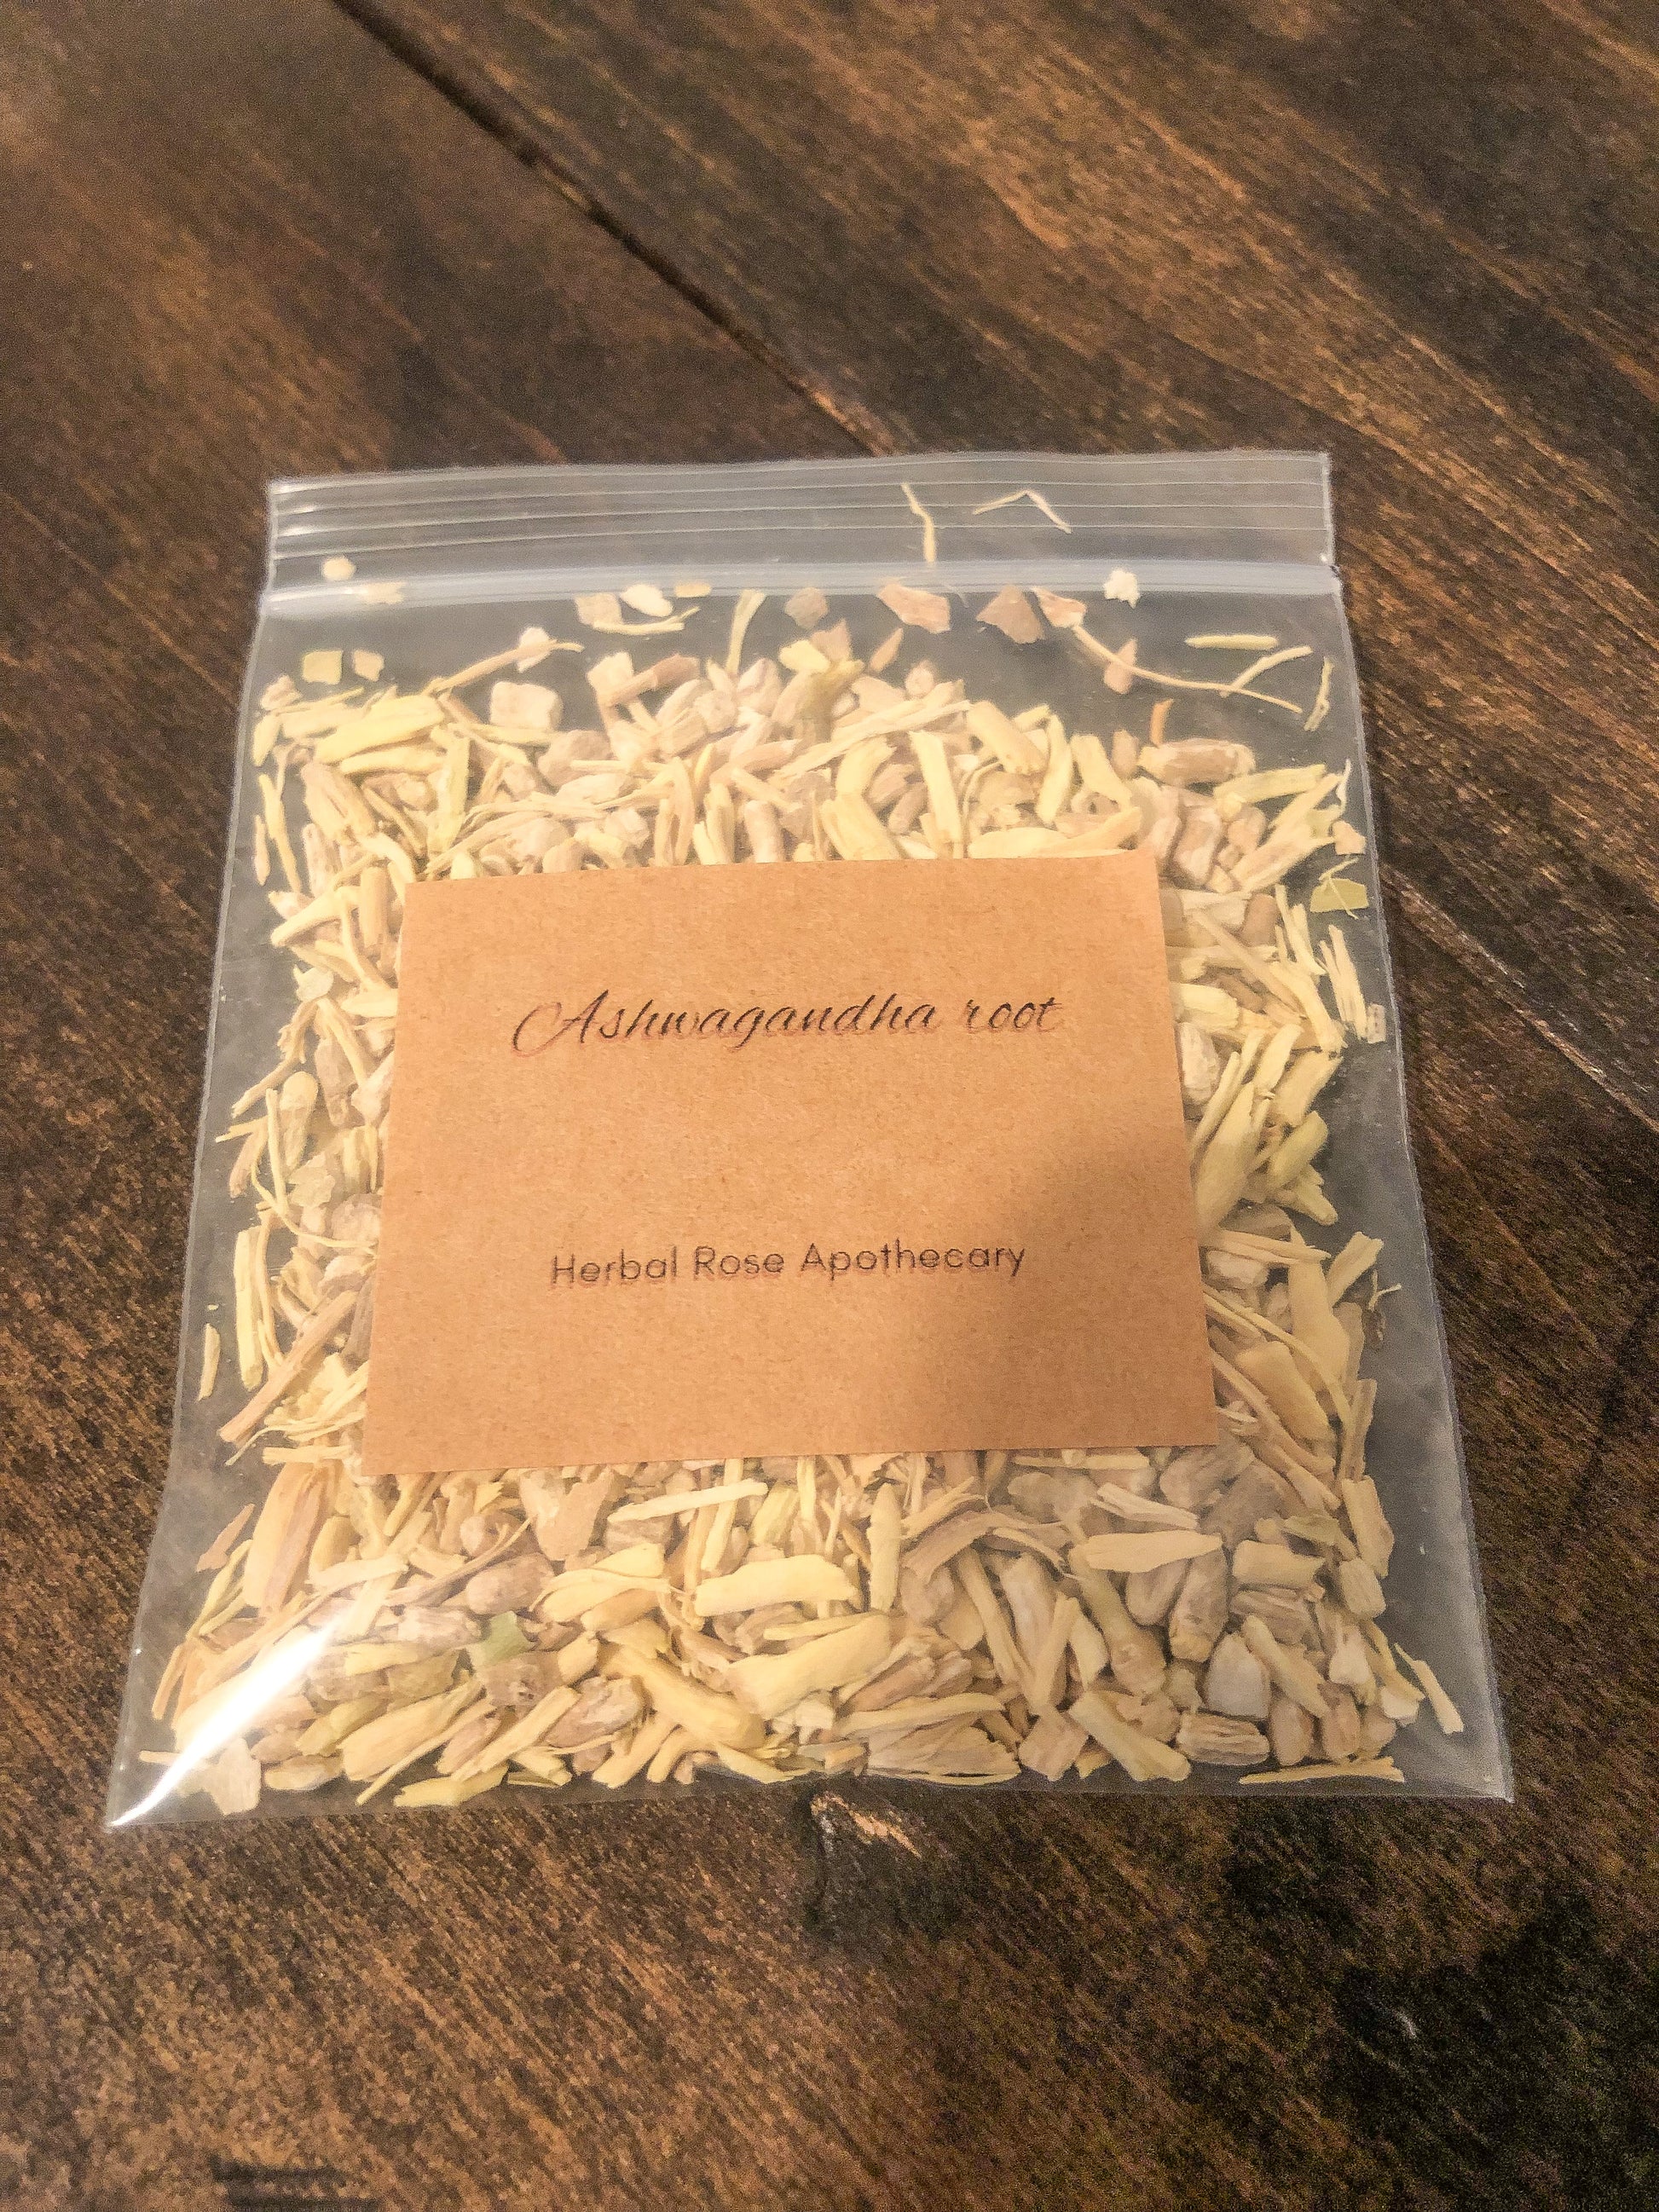 ashwagandha root 8g in clear bag on wooden background